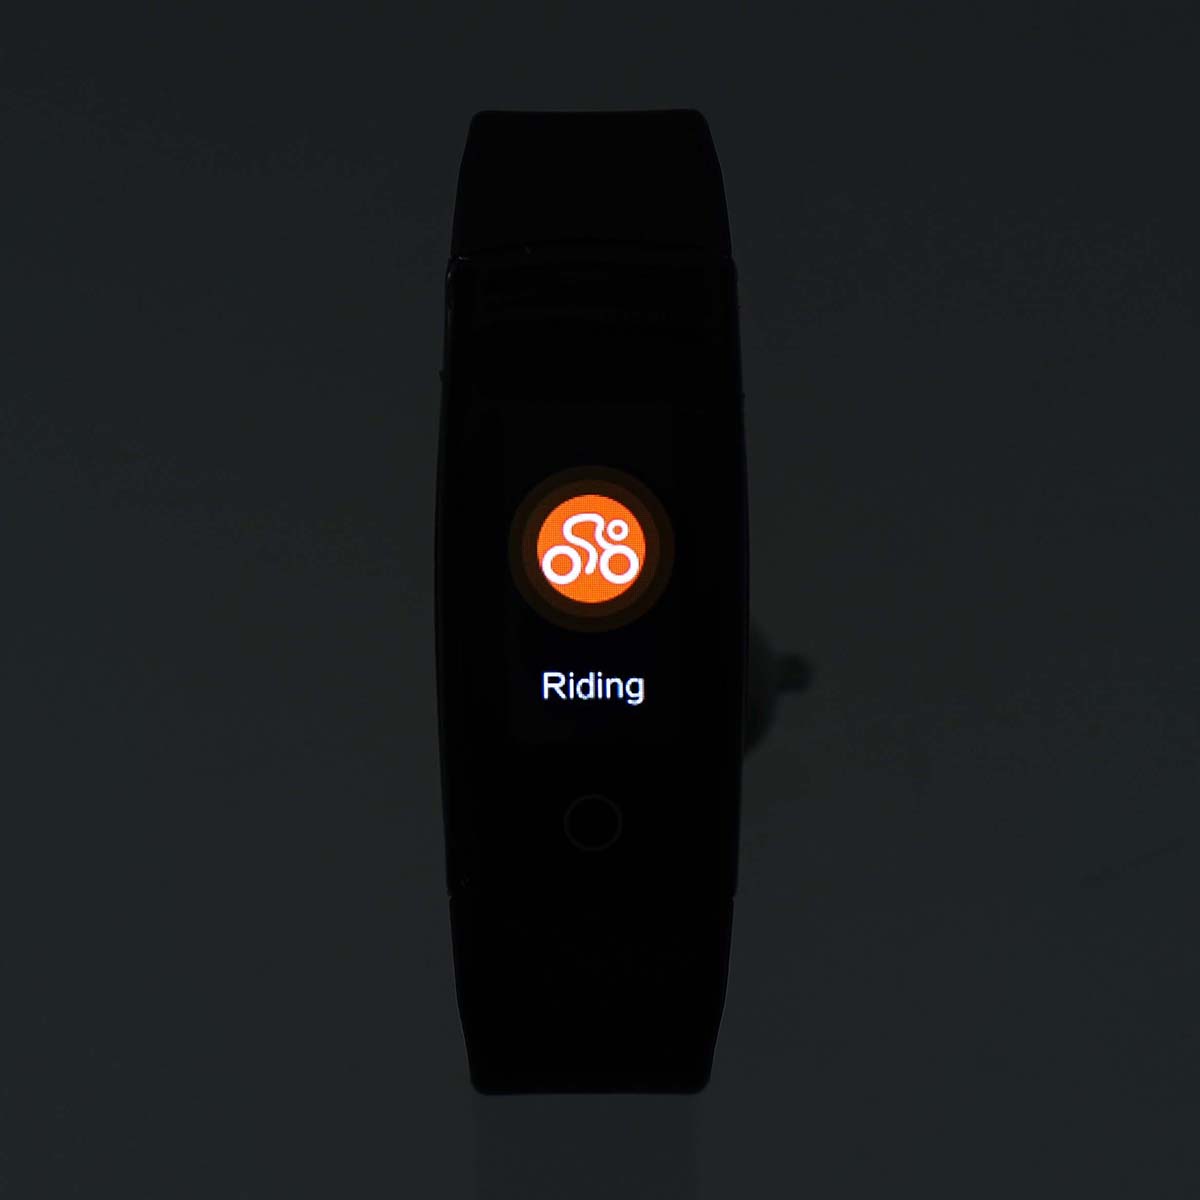 Find ELEGIANT C30 Fashion Black IP67 Waterpoof Heart Rate Sleep Monitor Brightness Control USB Charging Smart Watch for Sale on Gipsybee.com with cryptocurrencies